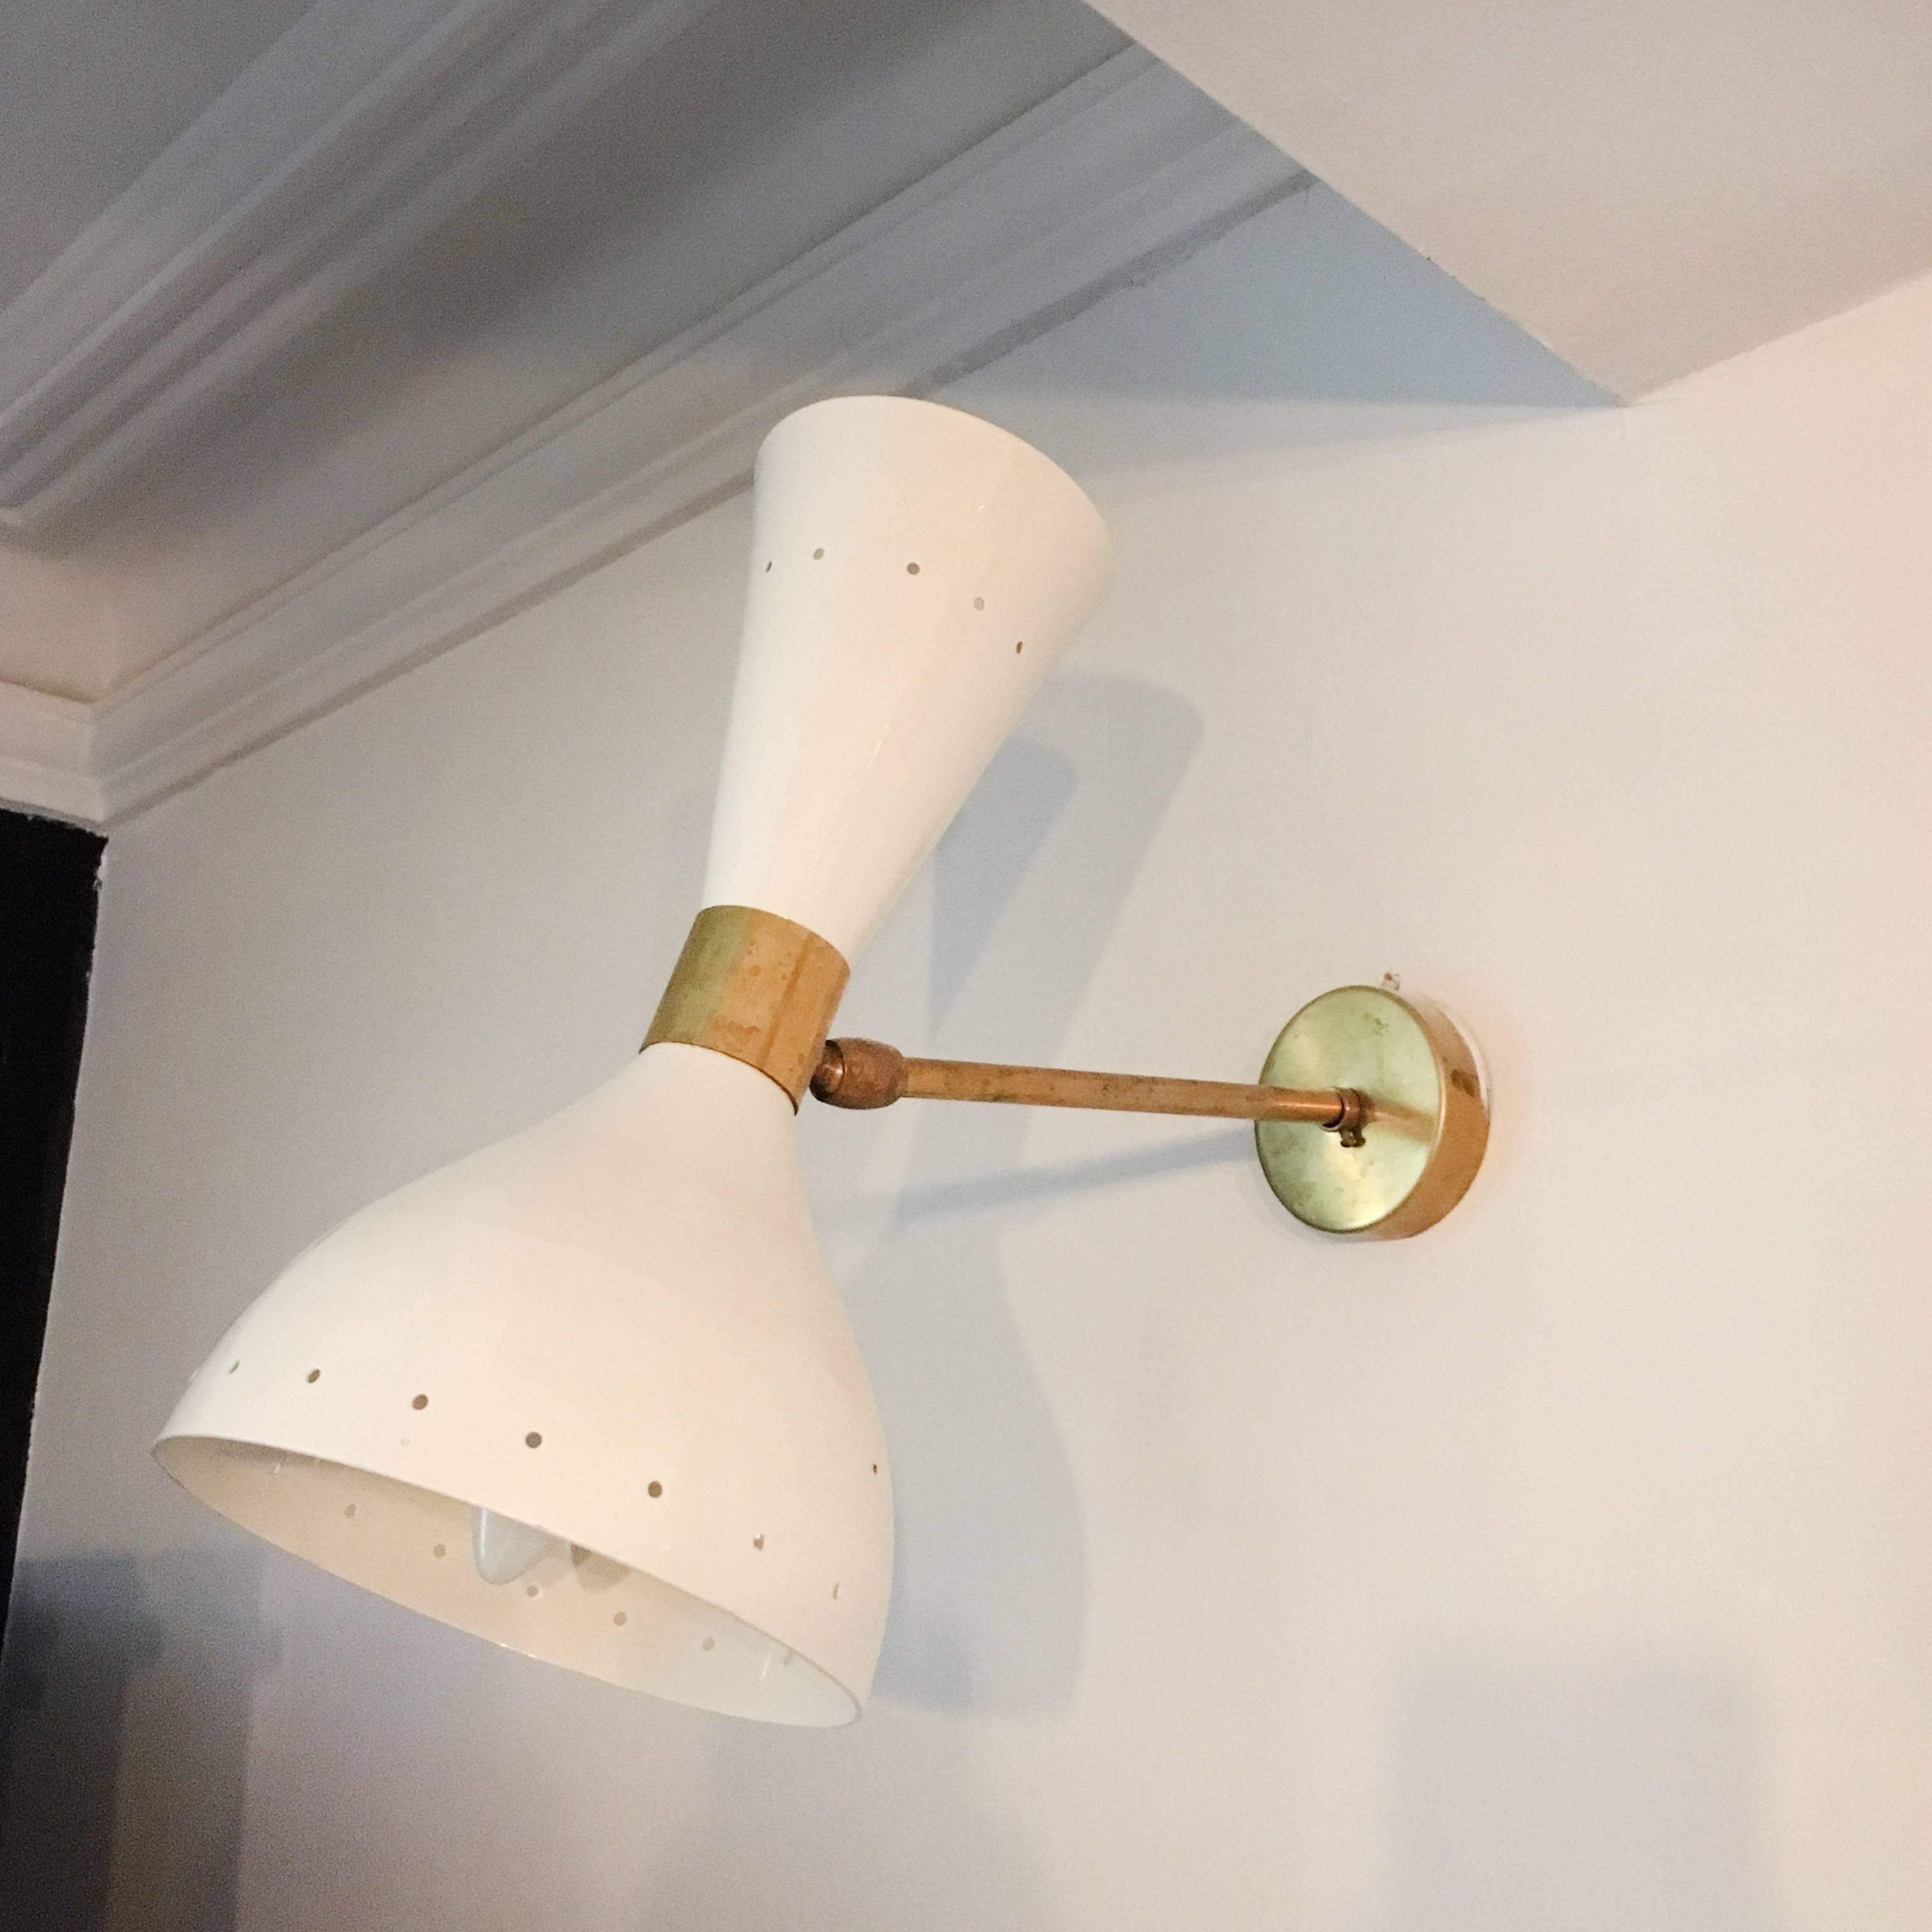 These elegant Mid-Century Italian wall lights each comprise of a diablo lampshade with both up and down lights. Each lamp is connected to their stem with a ball and socket join, allowing easy adjustments to the angle of the light.